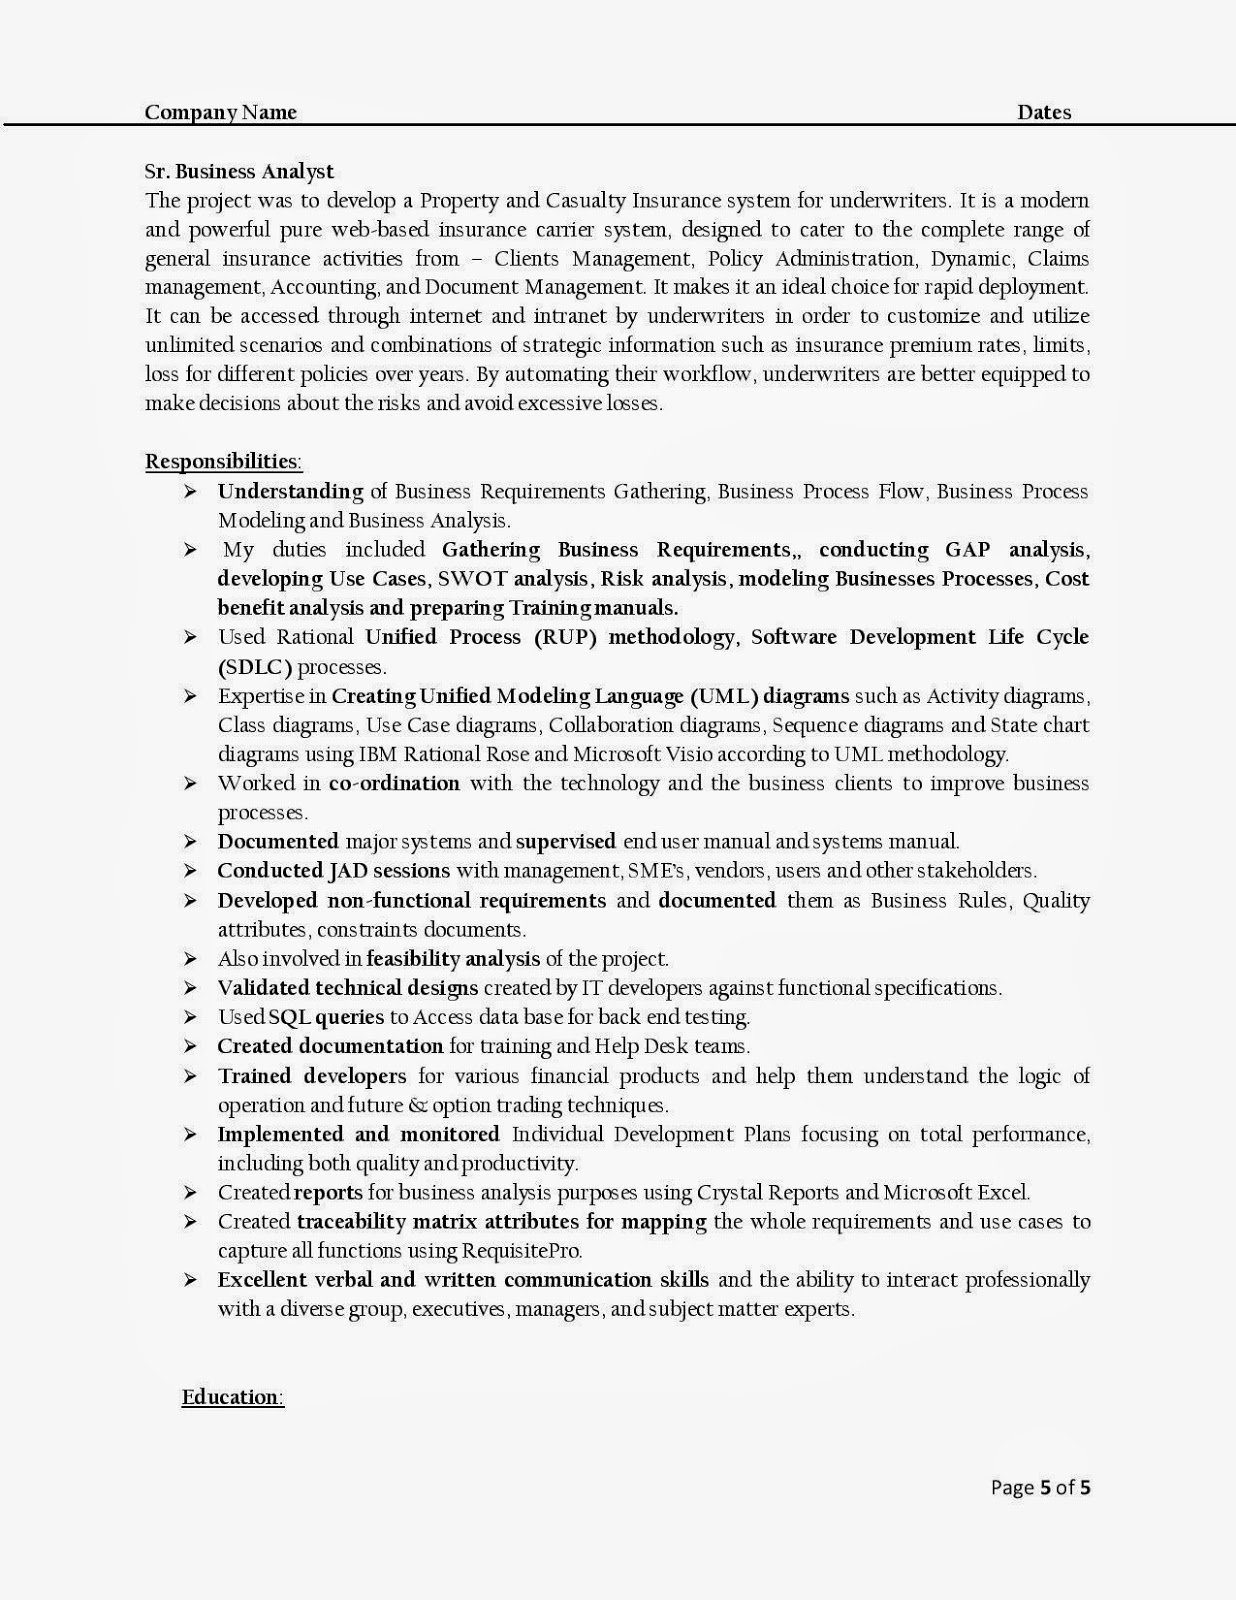 Sample_Business_Analyst_Resume-page-005.jpg